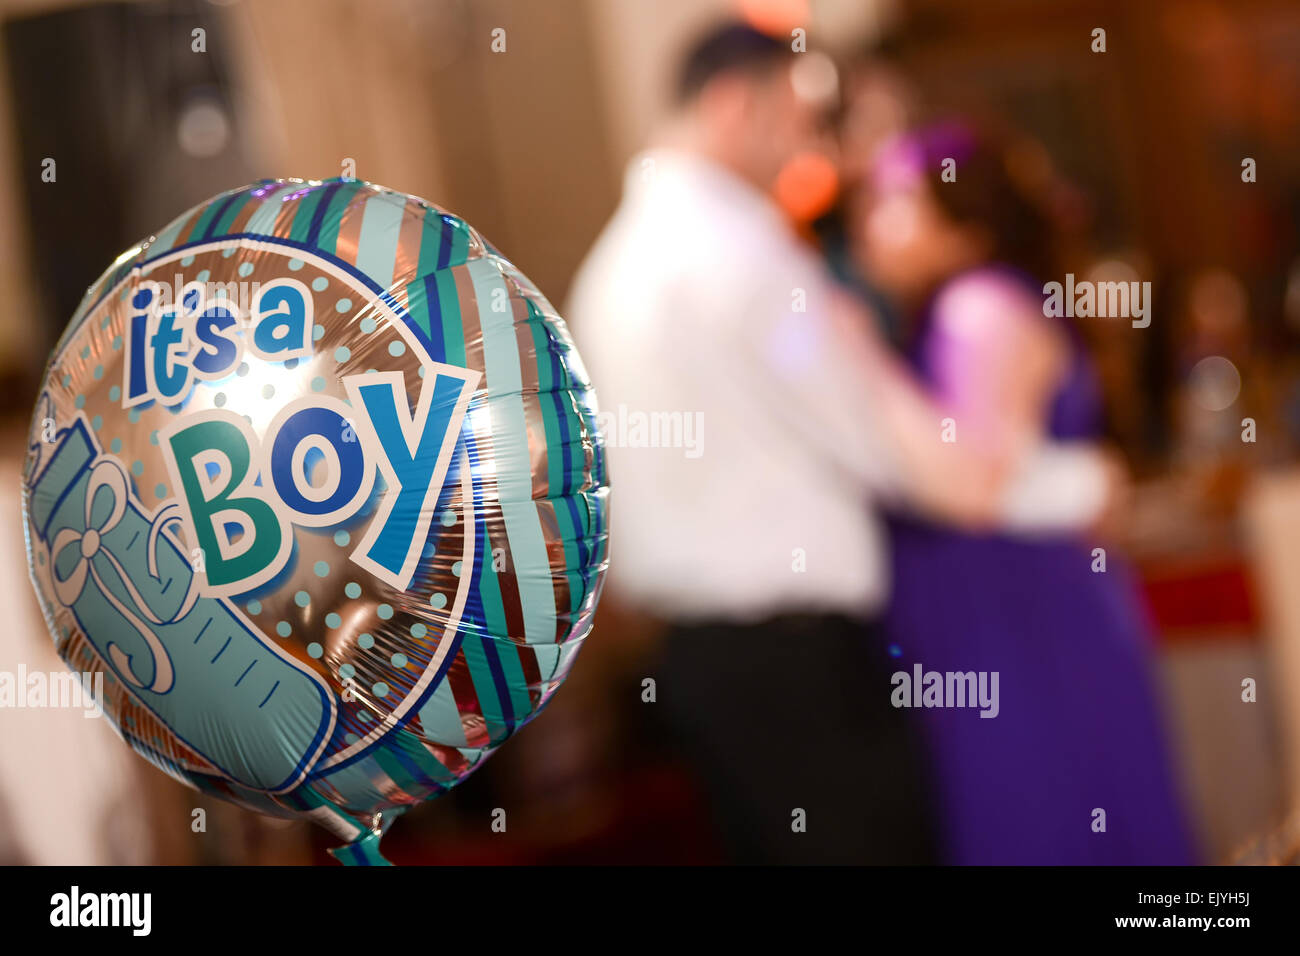 Party balloon with text message Stock Photo